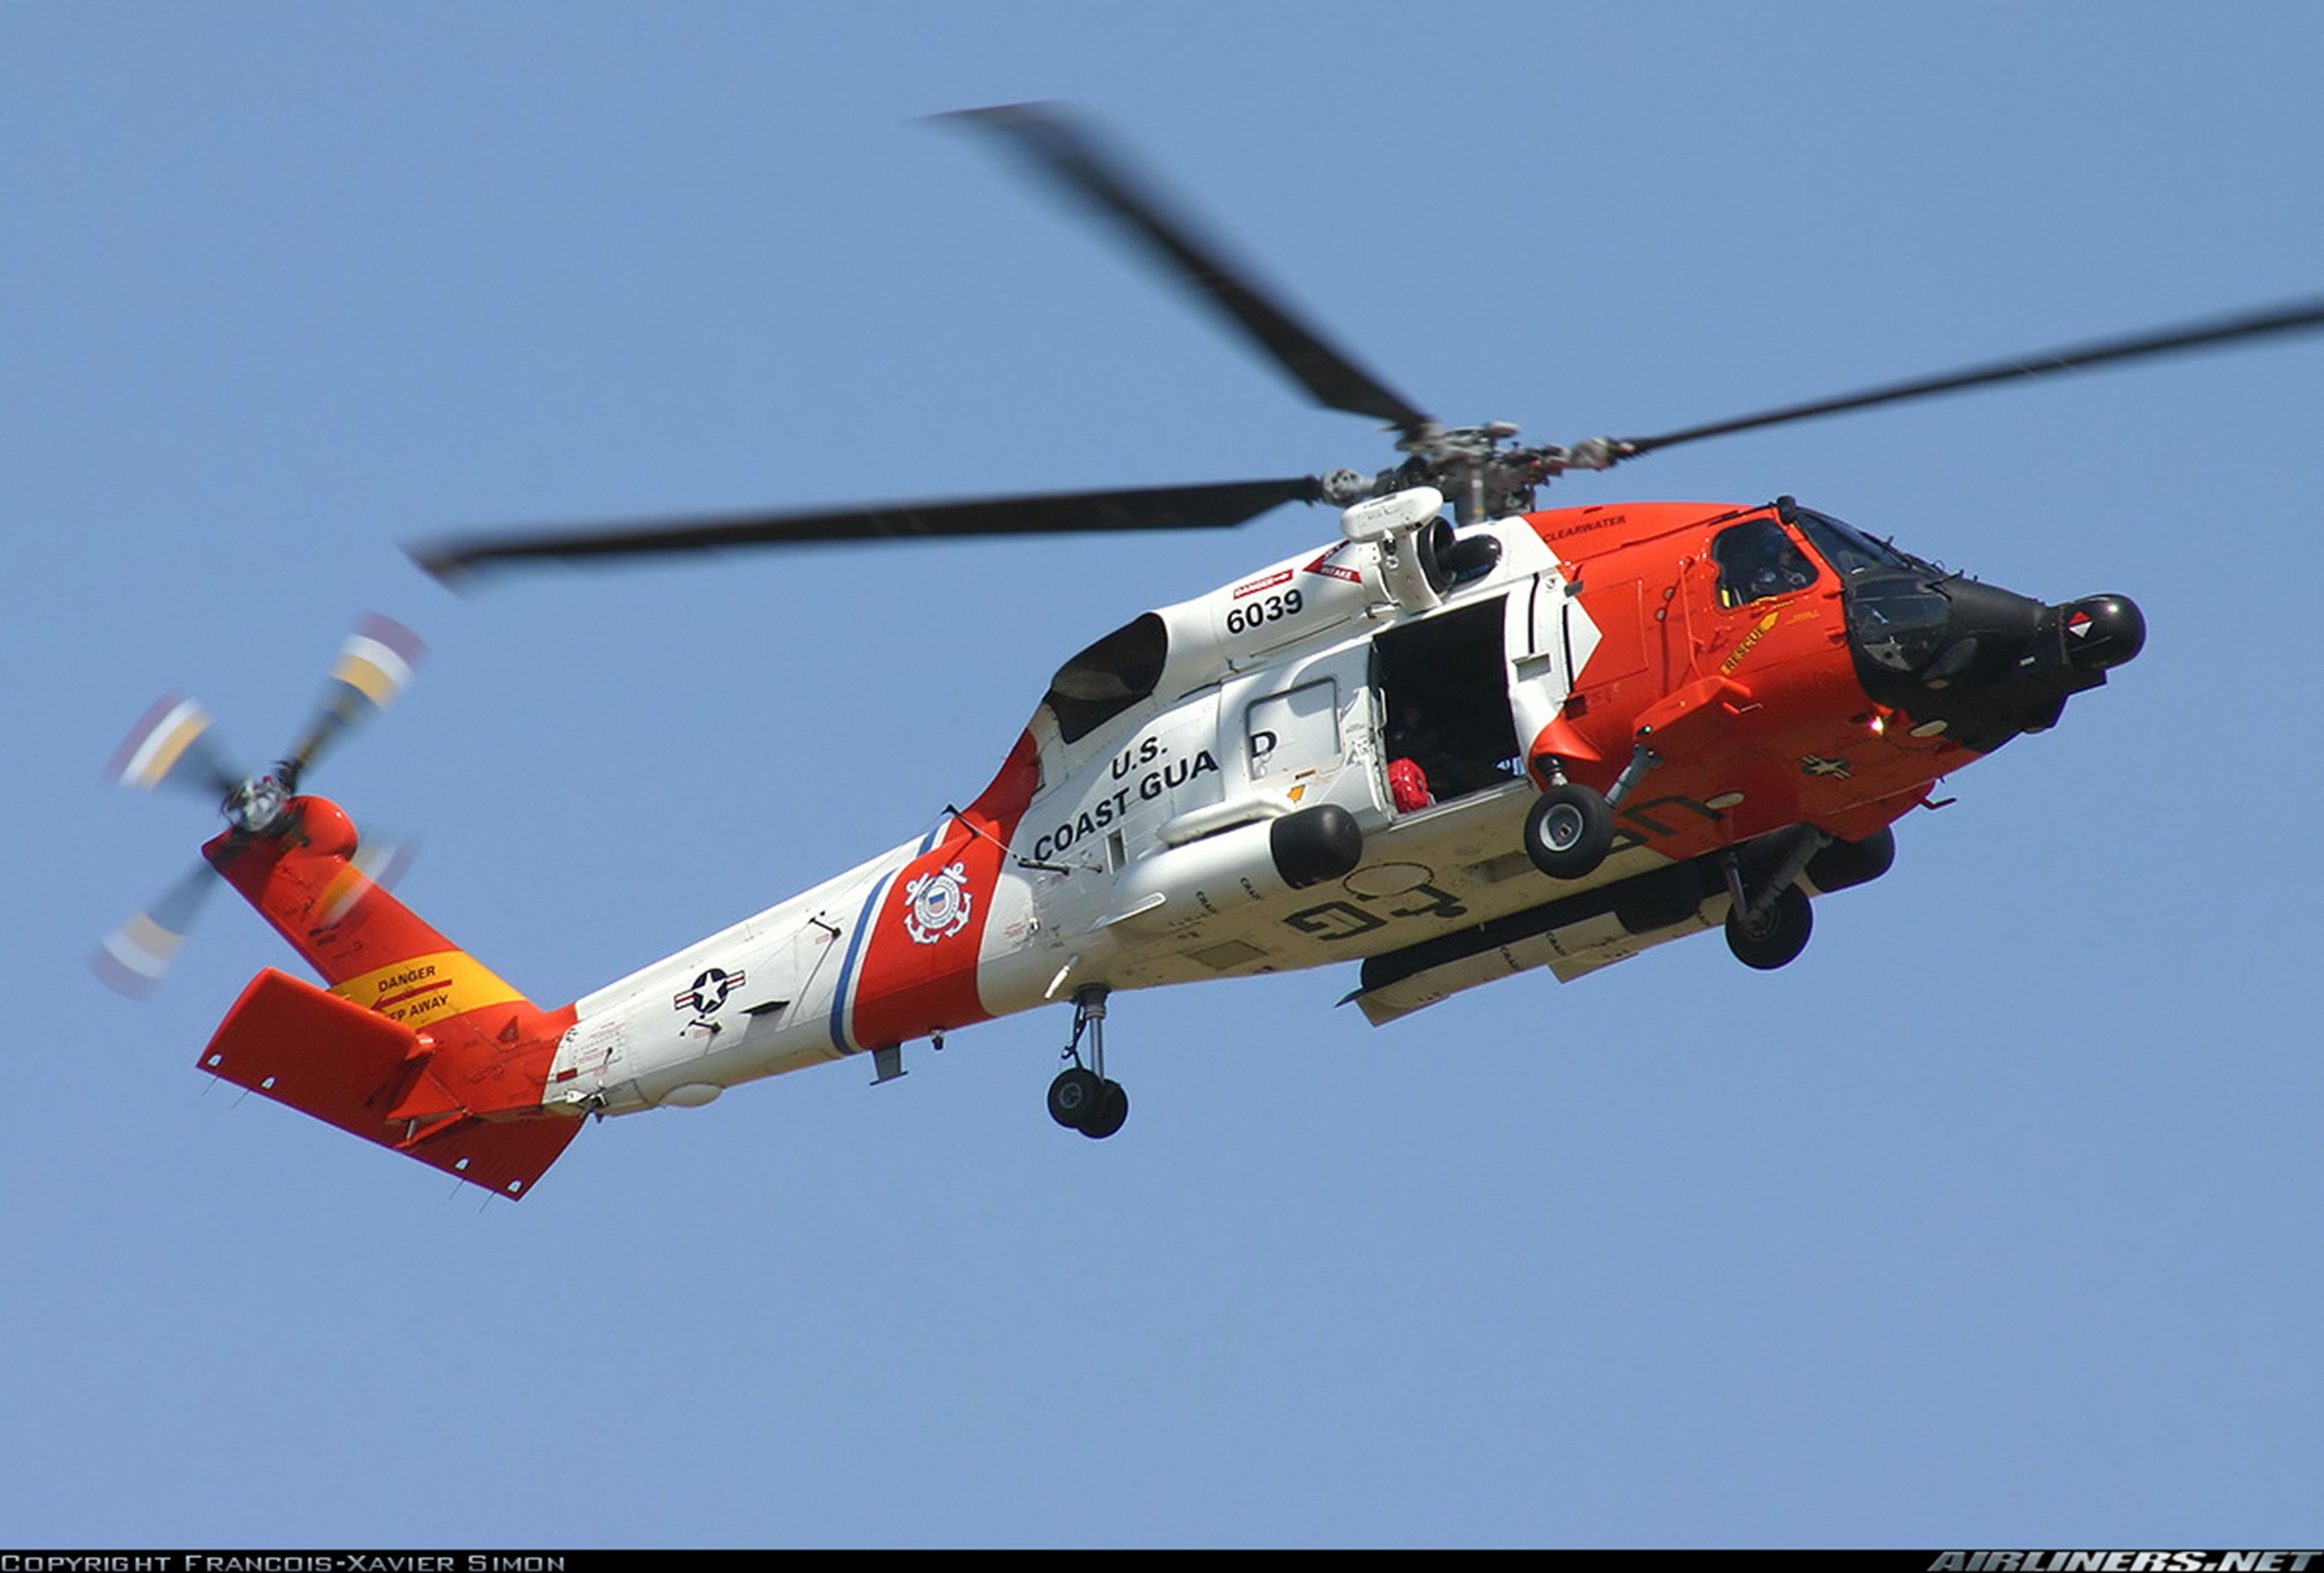 helicopter, Aircraft, Vehicle, Rescue, Coast guard Wallpaper